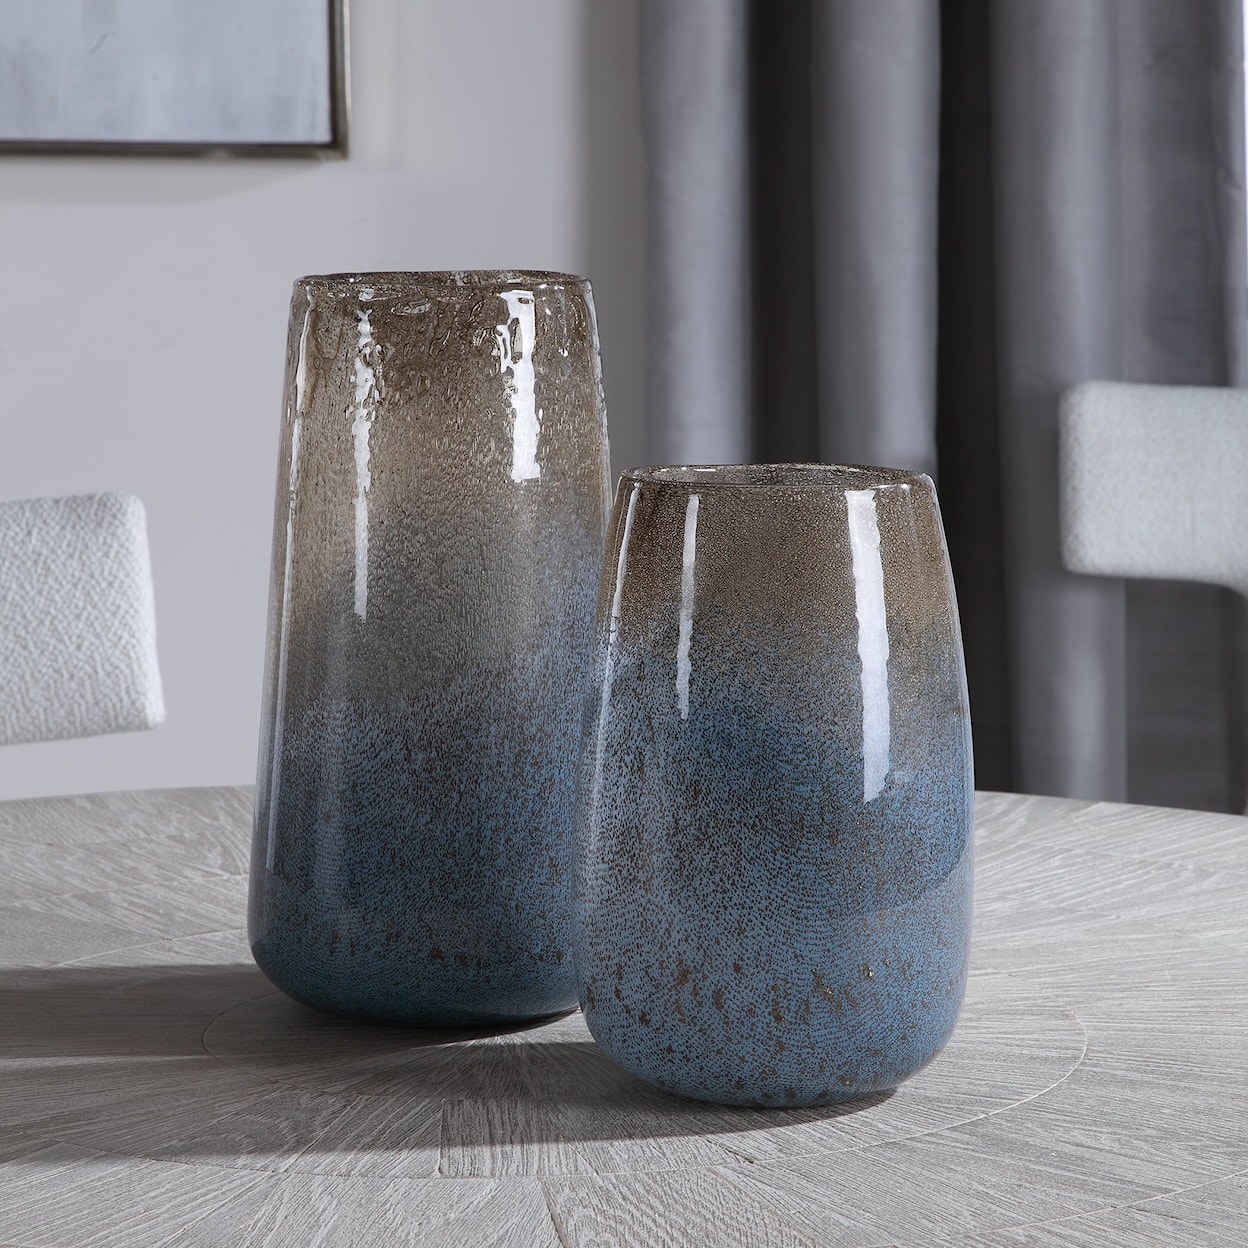 Uttermost Accessories - Vases and Urns Ione Seeded Glass Vases, S/2